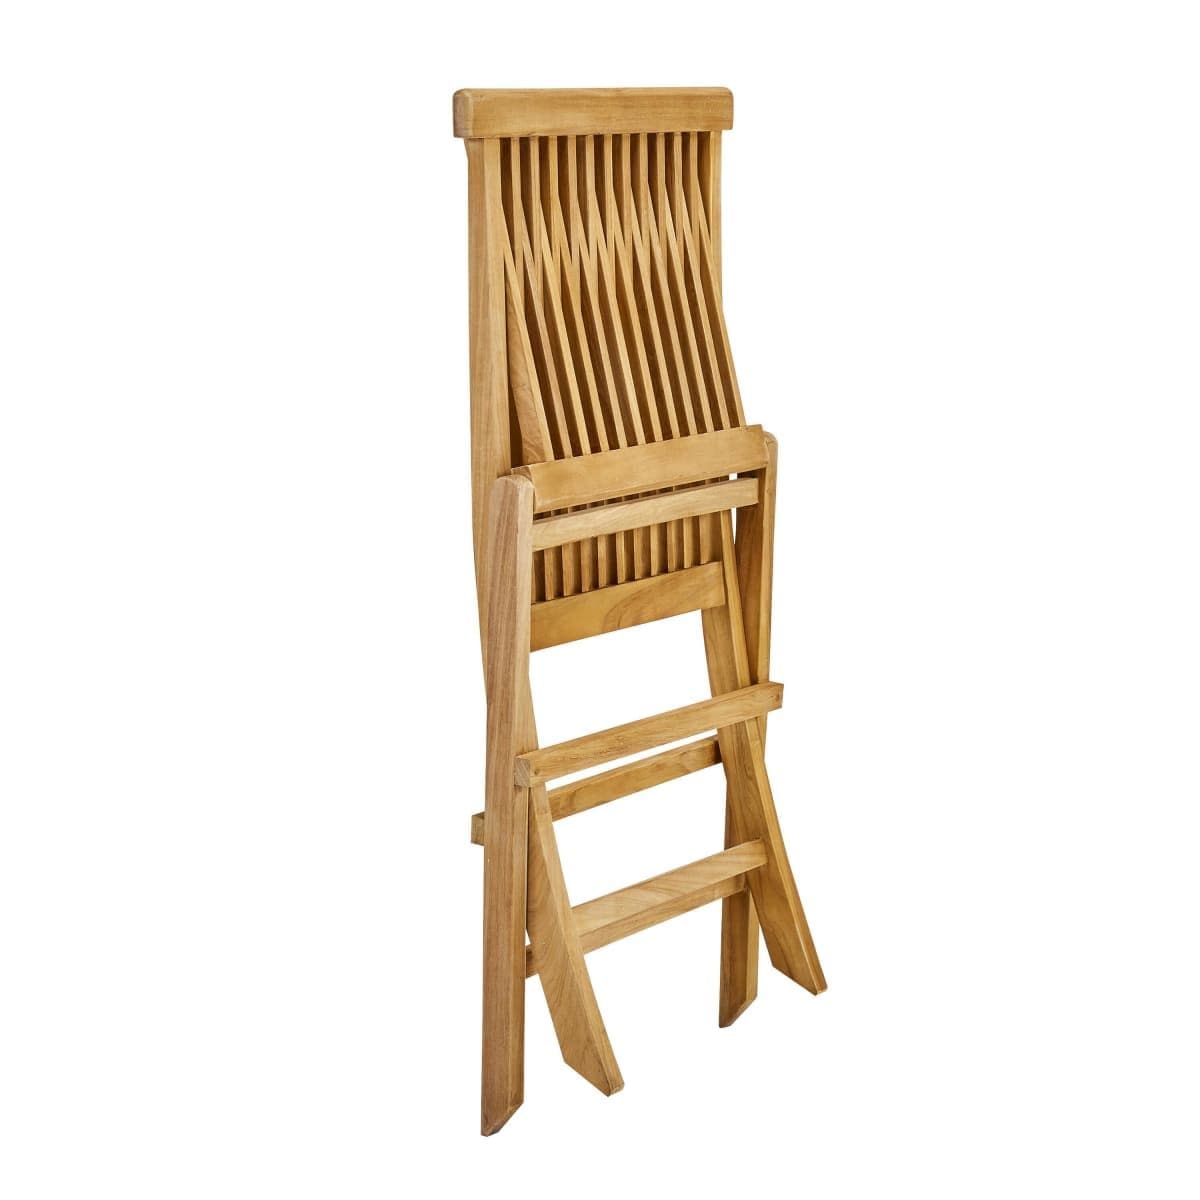 ANTEA ORIGAMI NATERIAL Set 2 chairs in teak 61X48X88 - Premium Garden Chairs from Bricocenter - Just €97.99! Shop now at Maltashopper.com